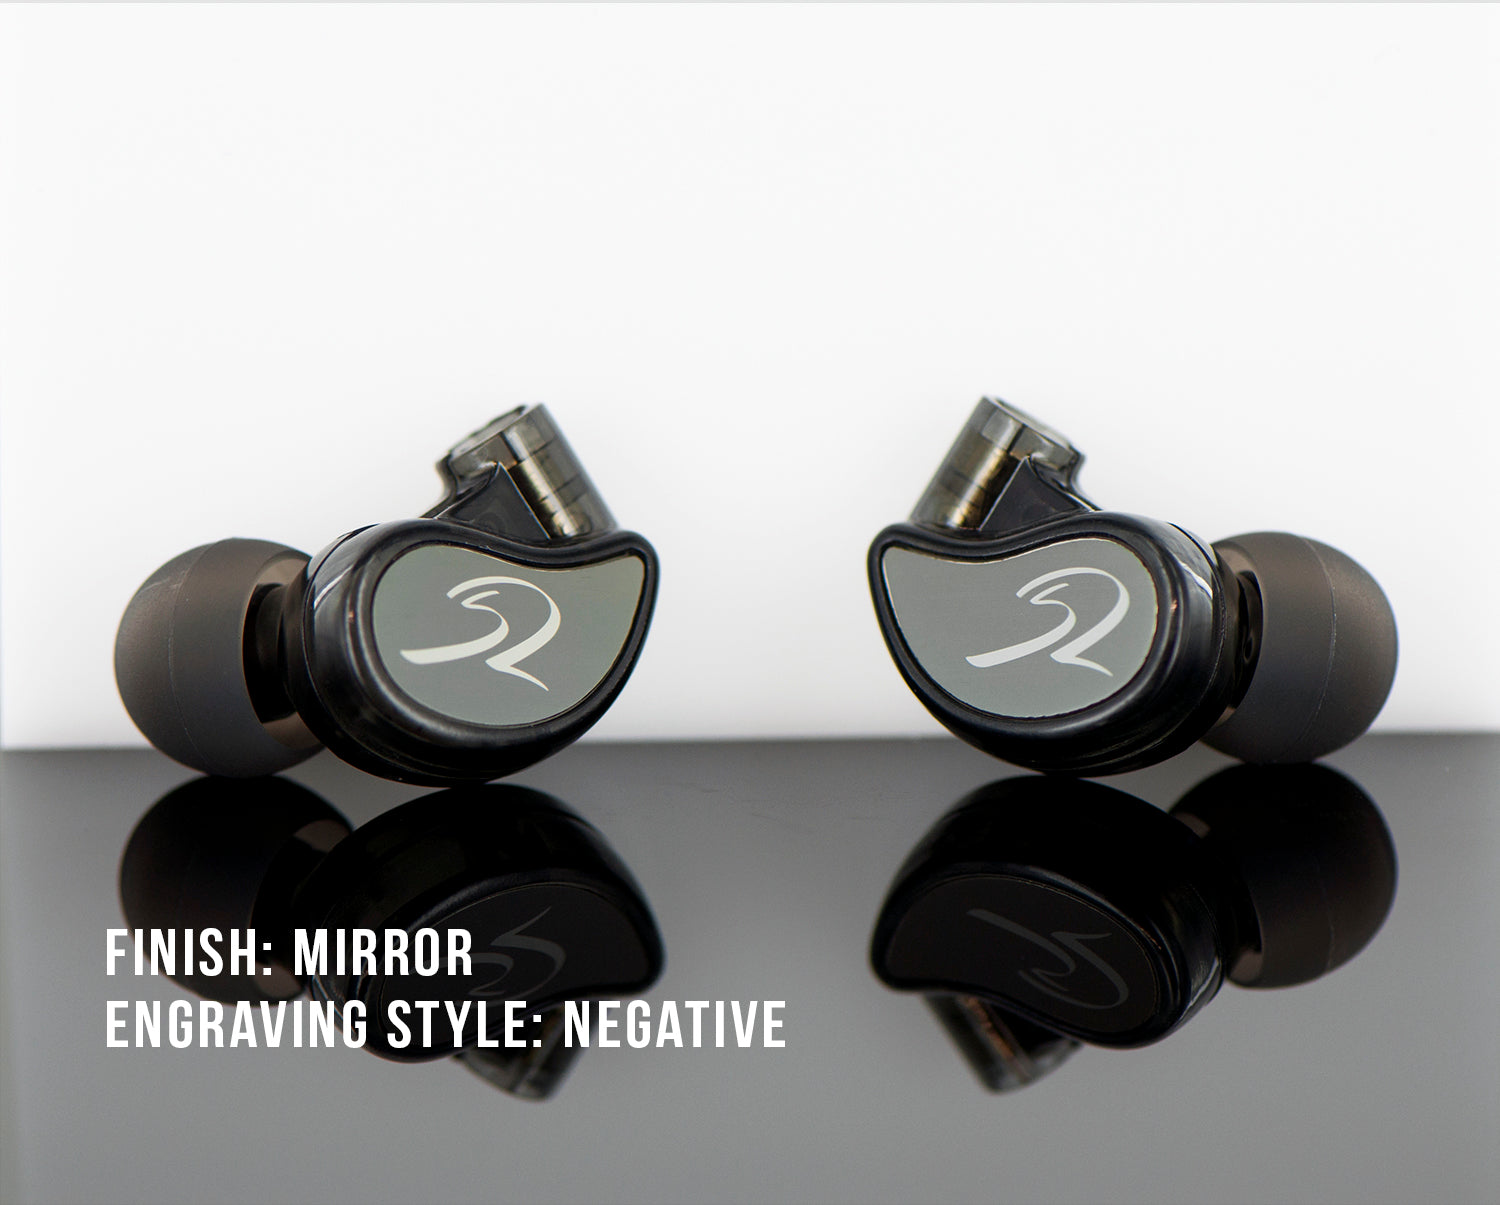 Two black in-ear headphones with a mirrored finish and a white logo, displayed on a reflective surface, with the text "finish: mirror engraving style: negative" below.